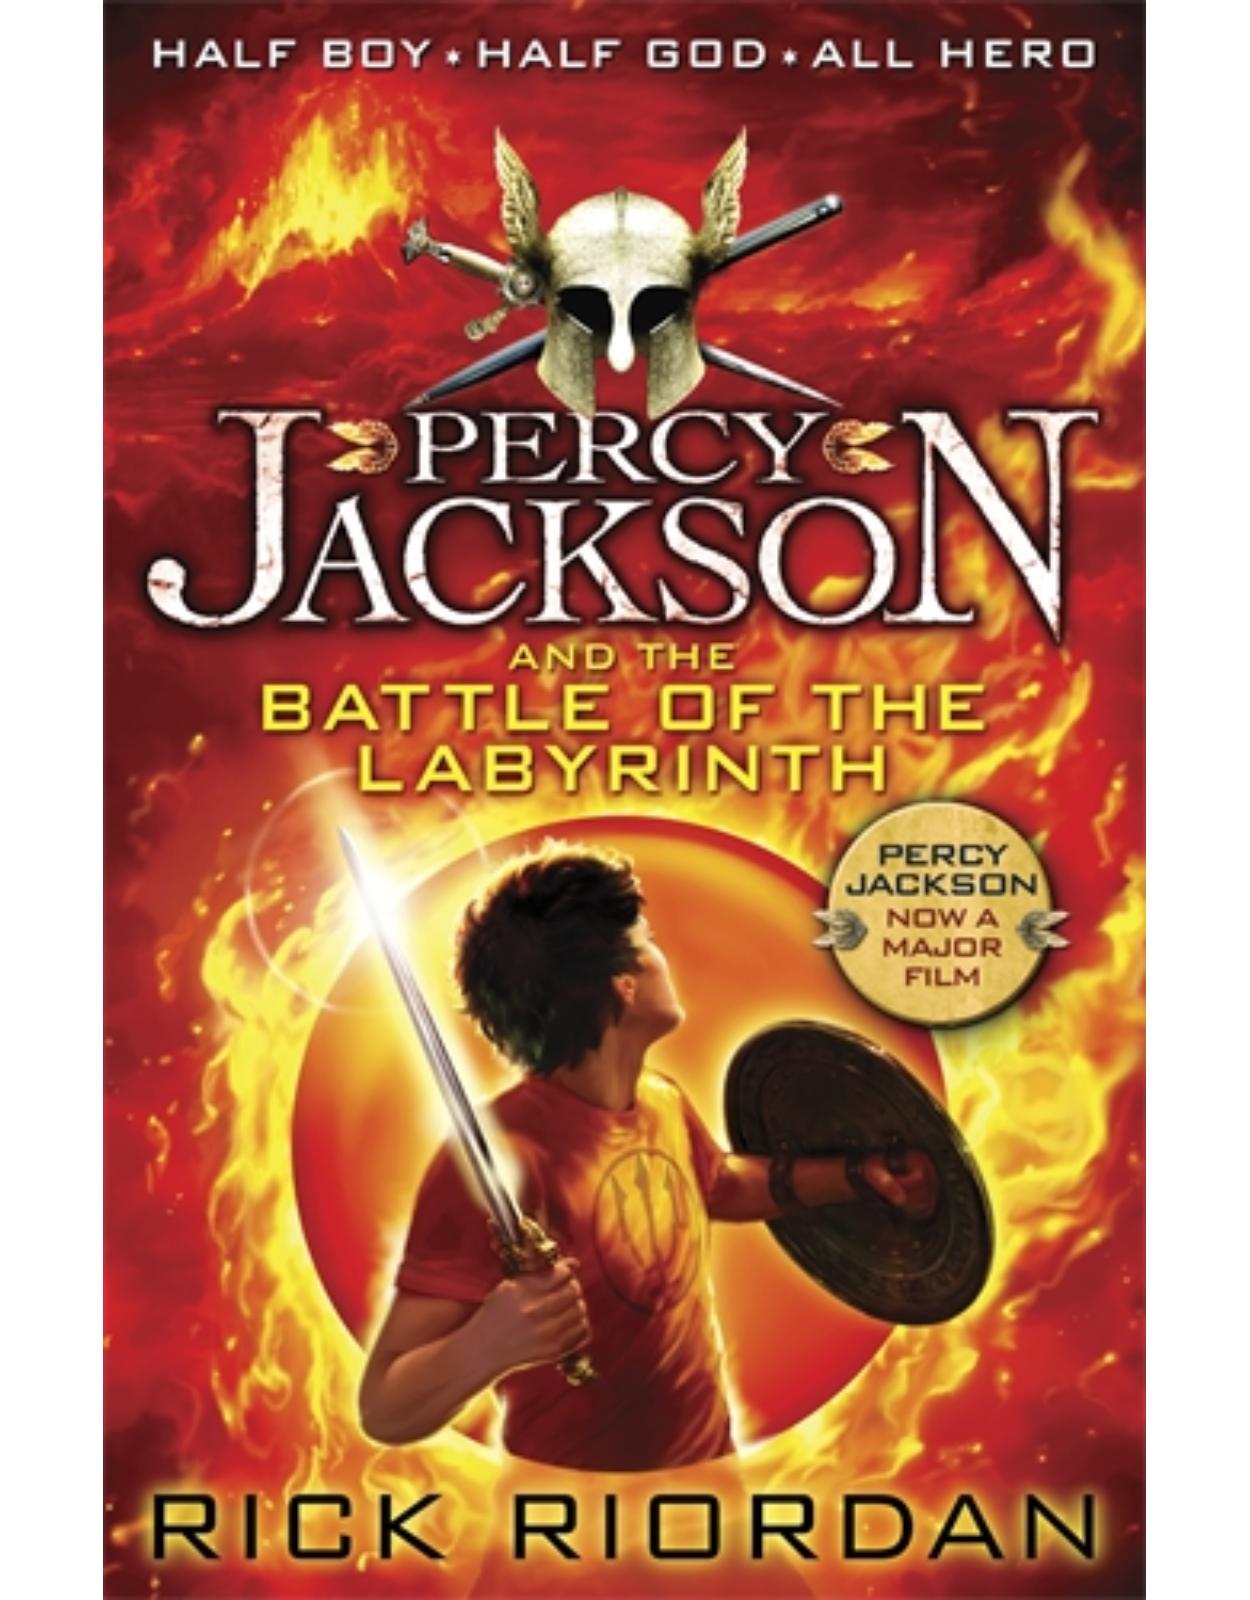 PERCY JACKSON AND THE BATTLE OF THE